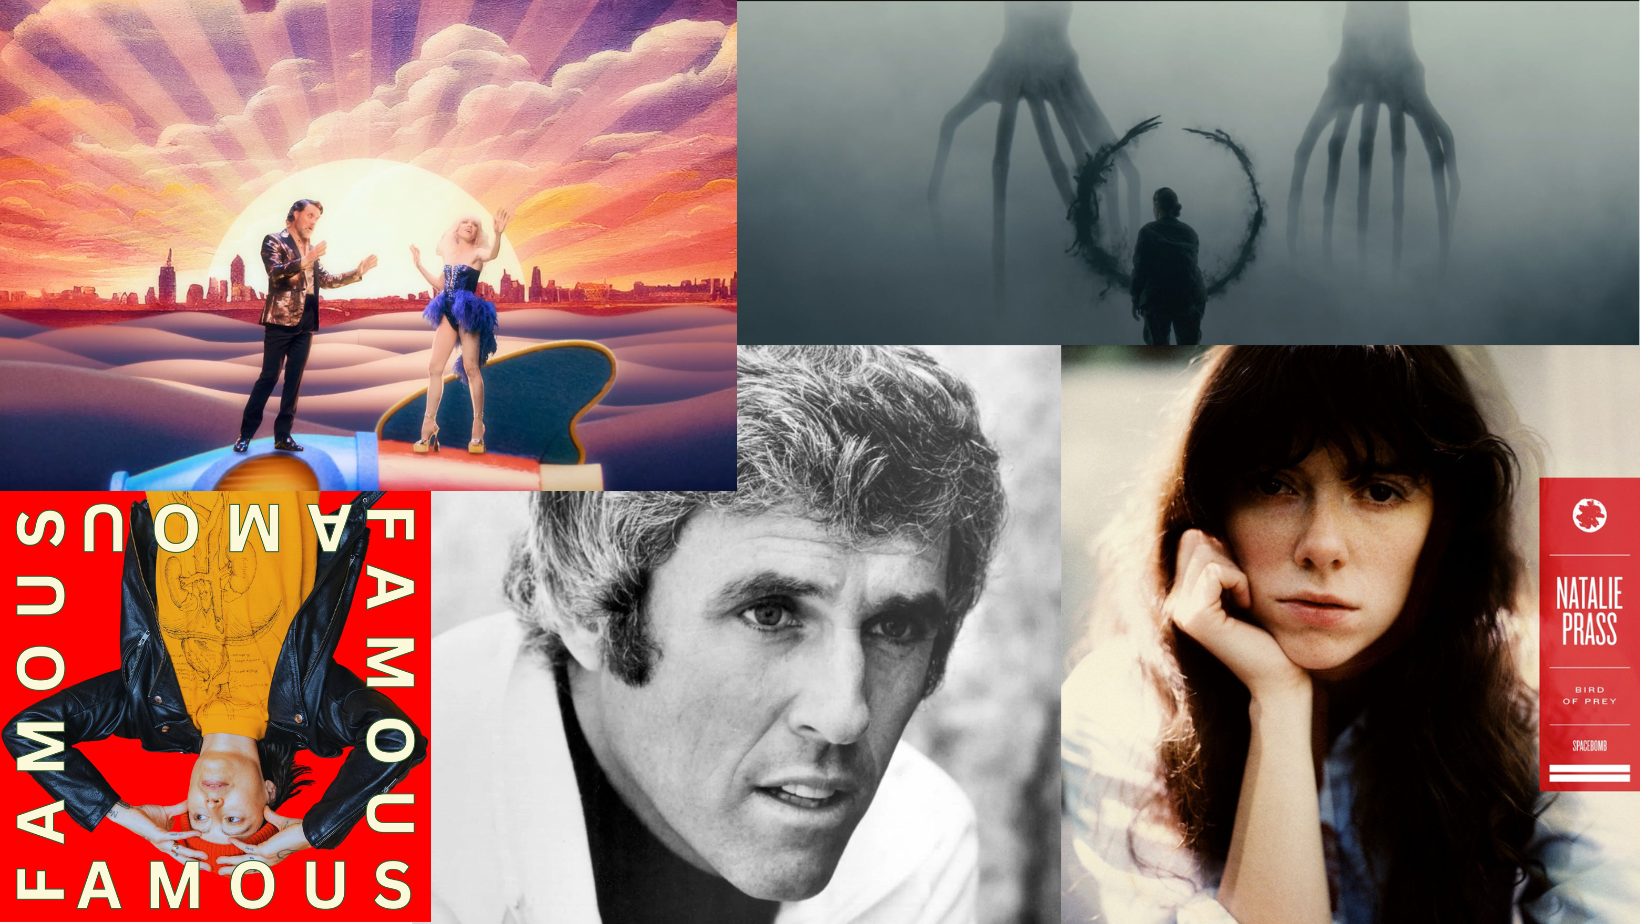 A collage of images representing the five songs listed below.